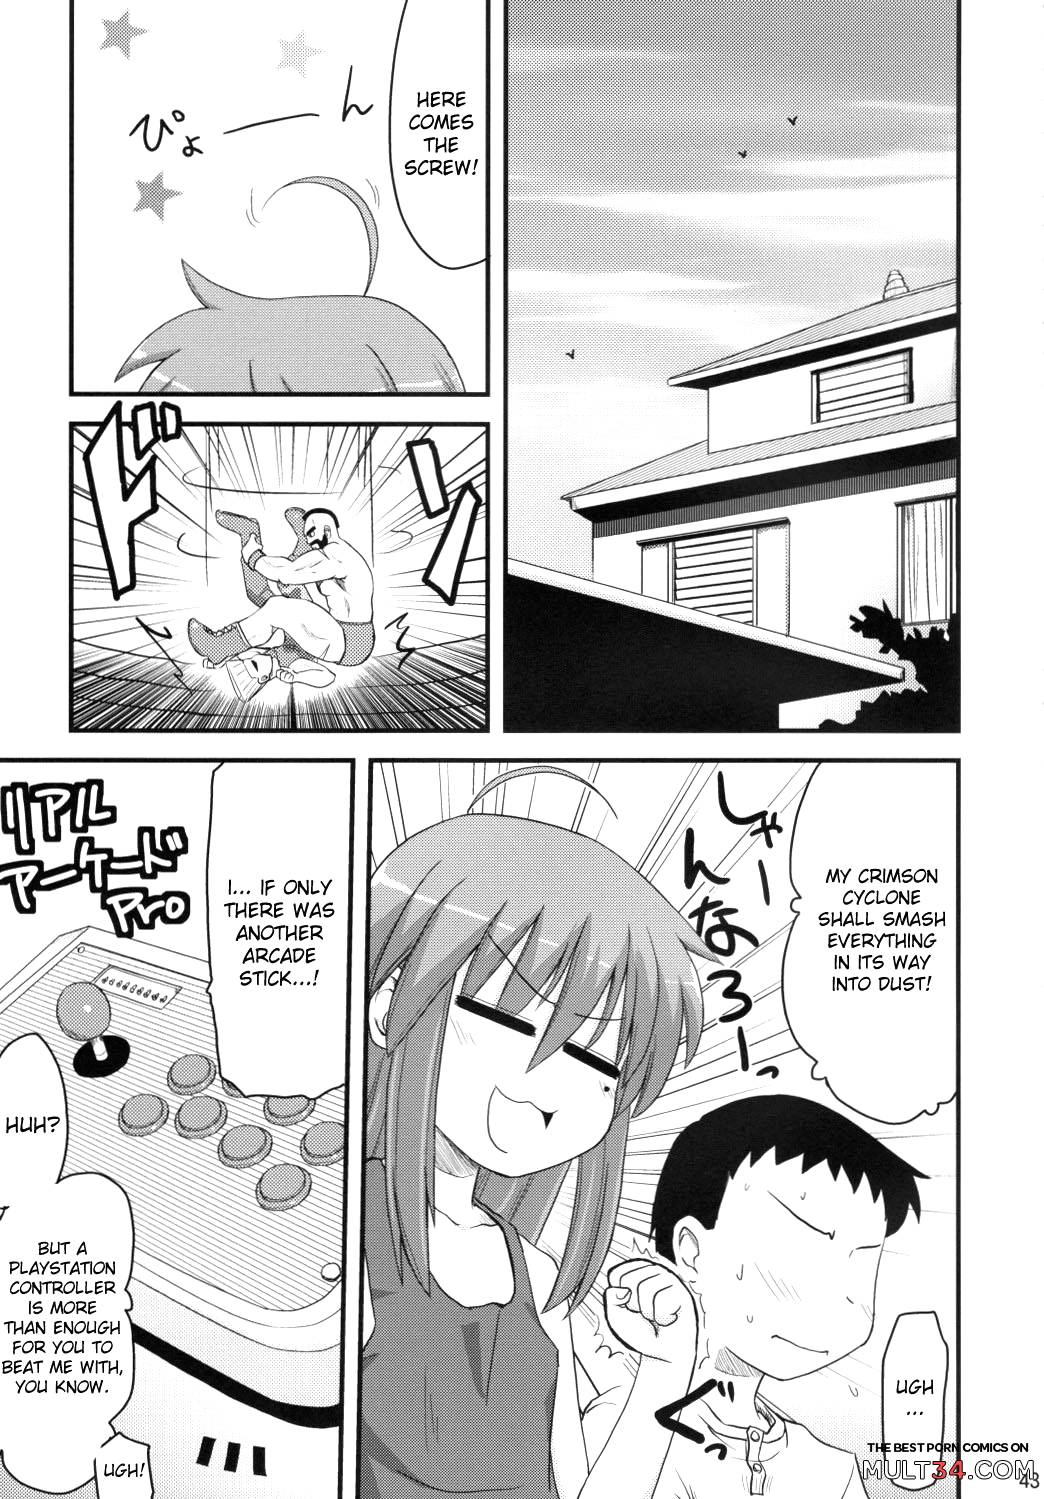 Konata and Oh-zu 4 people each and every one + 1 page 39